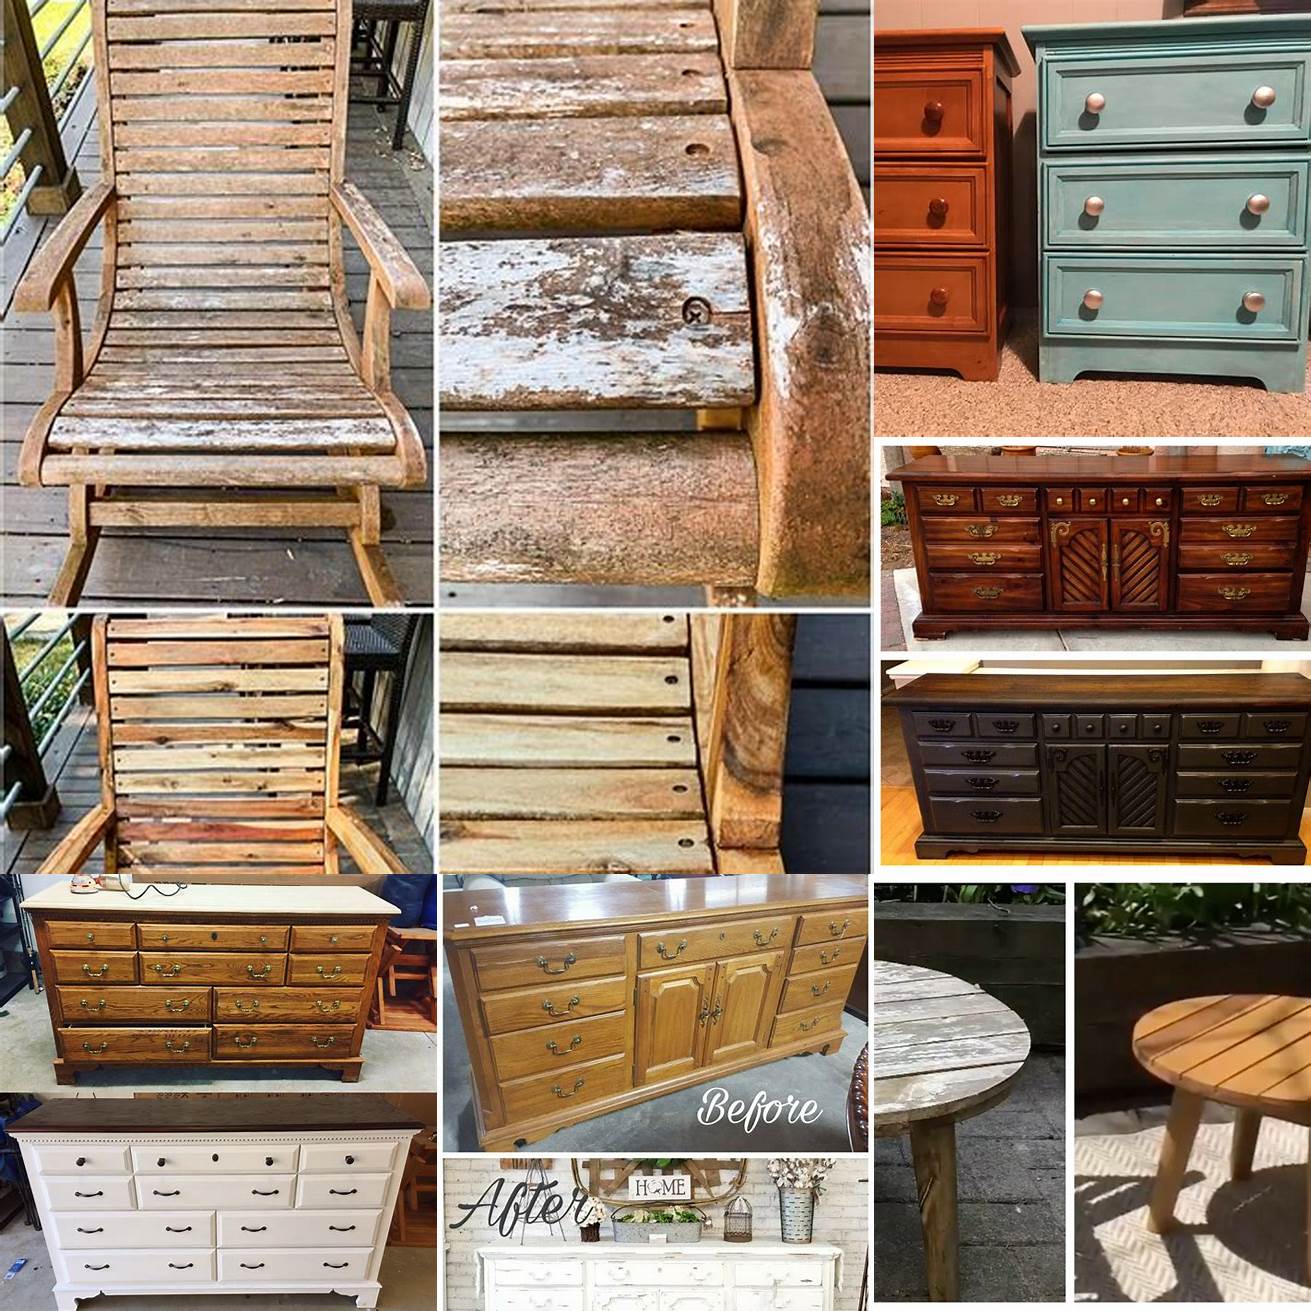 Before and After Photos of Teak Furniture in Different Colors